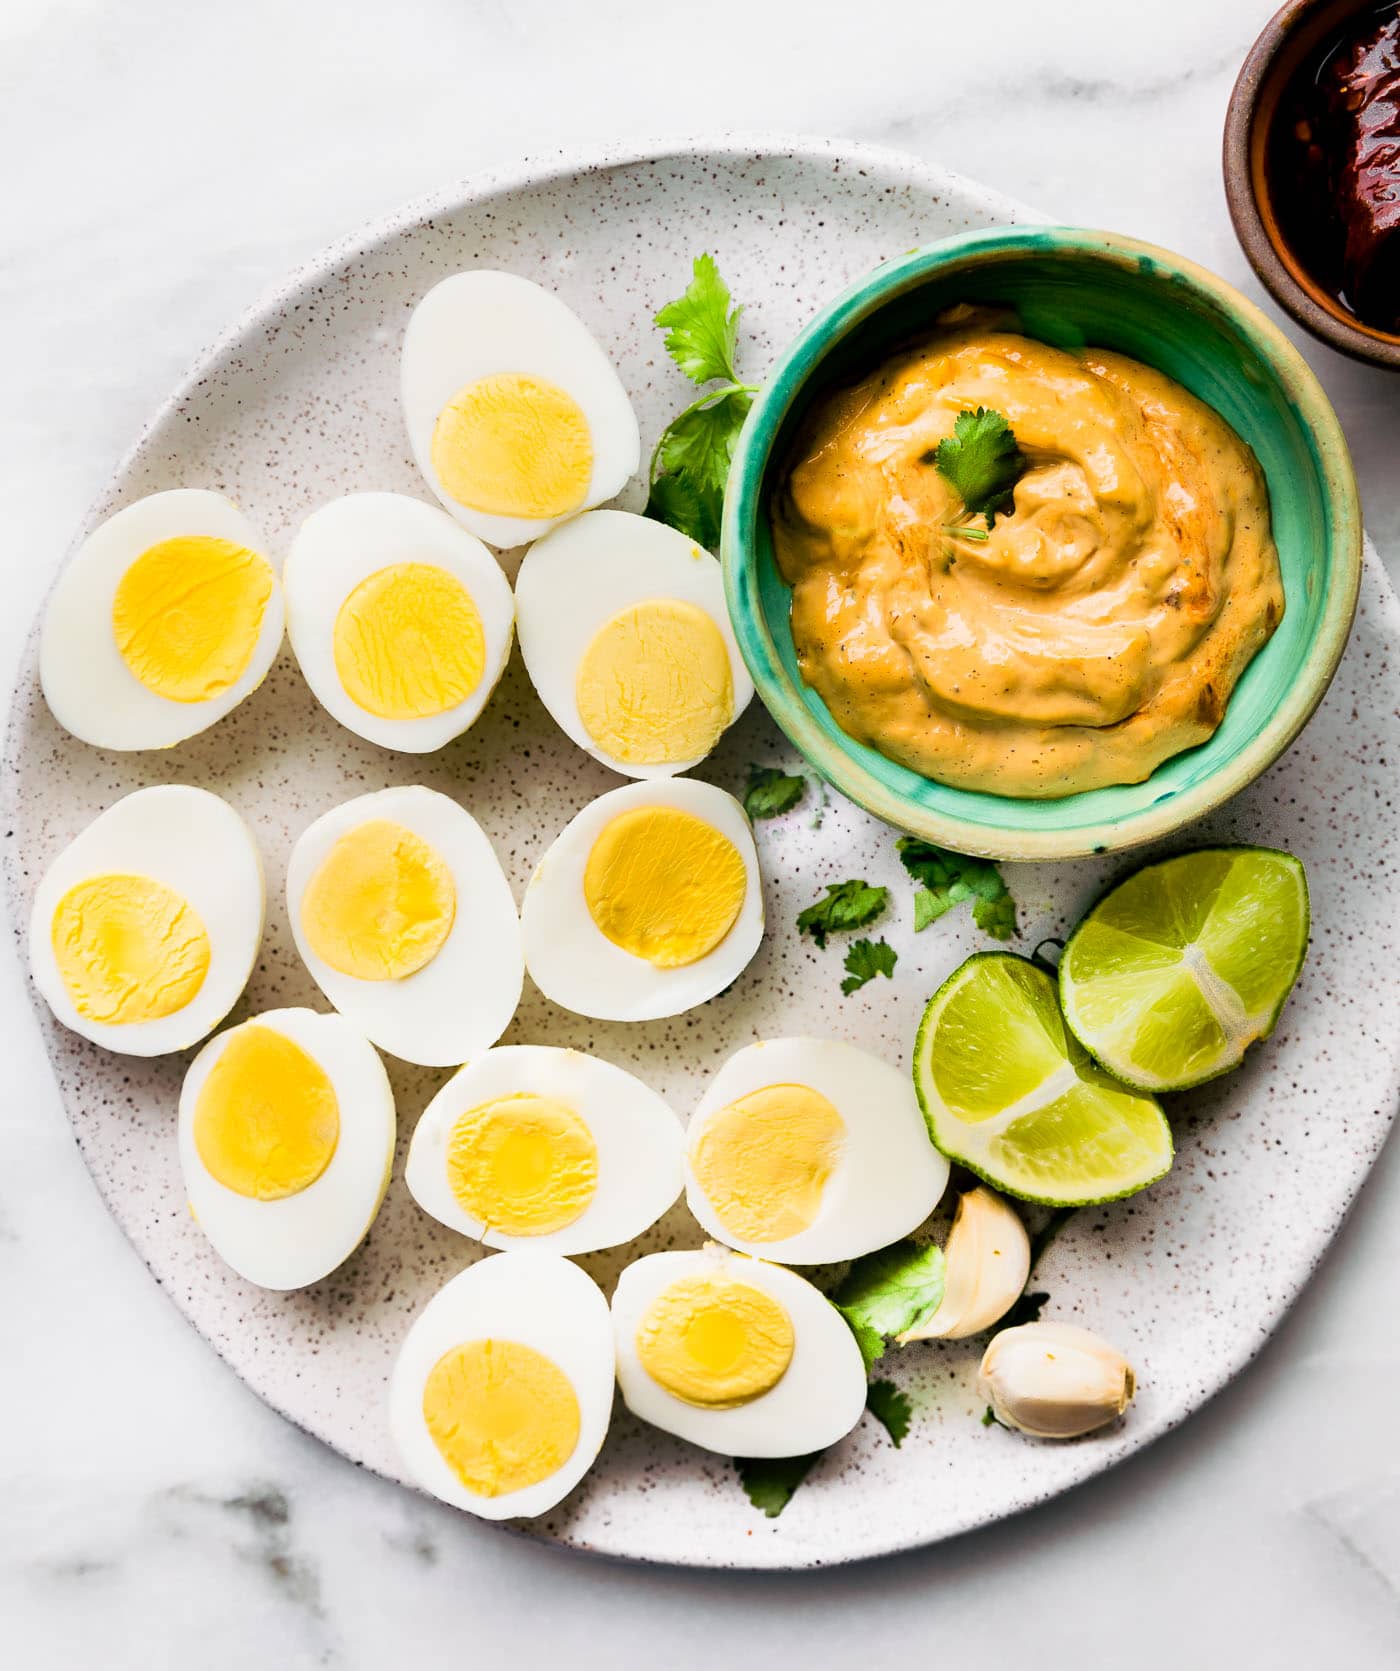 All ingredients for deviled eggs with chipotle mayo.